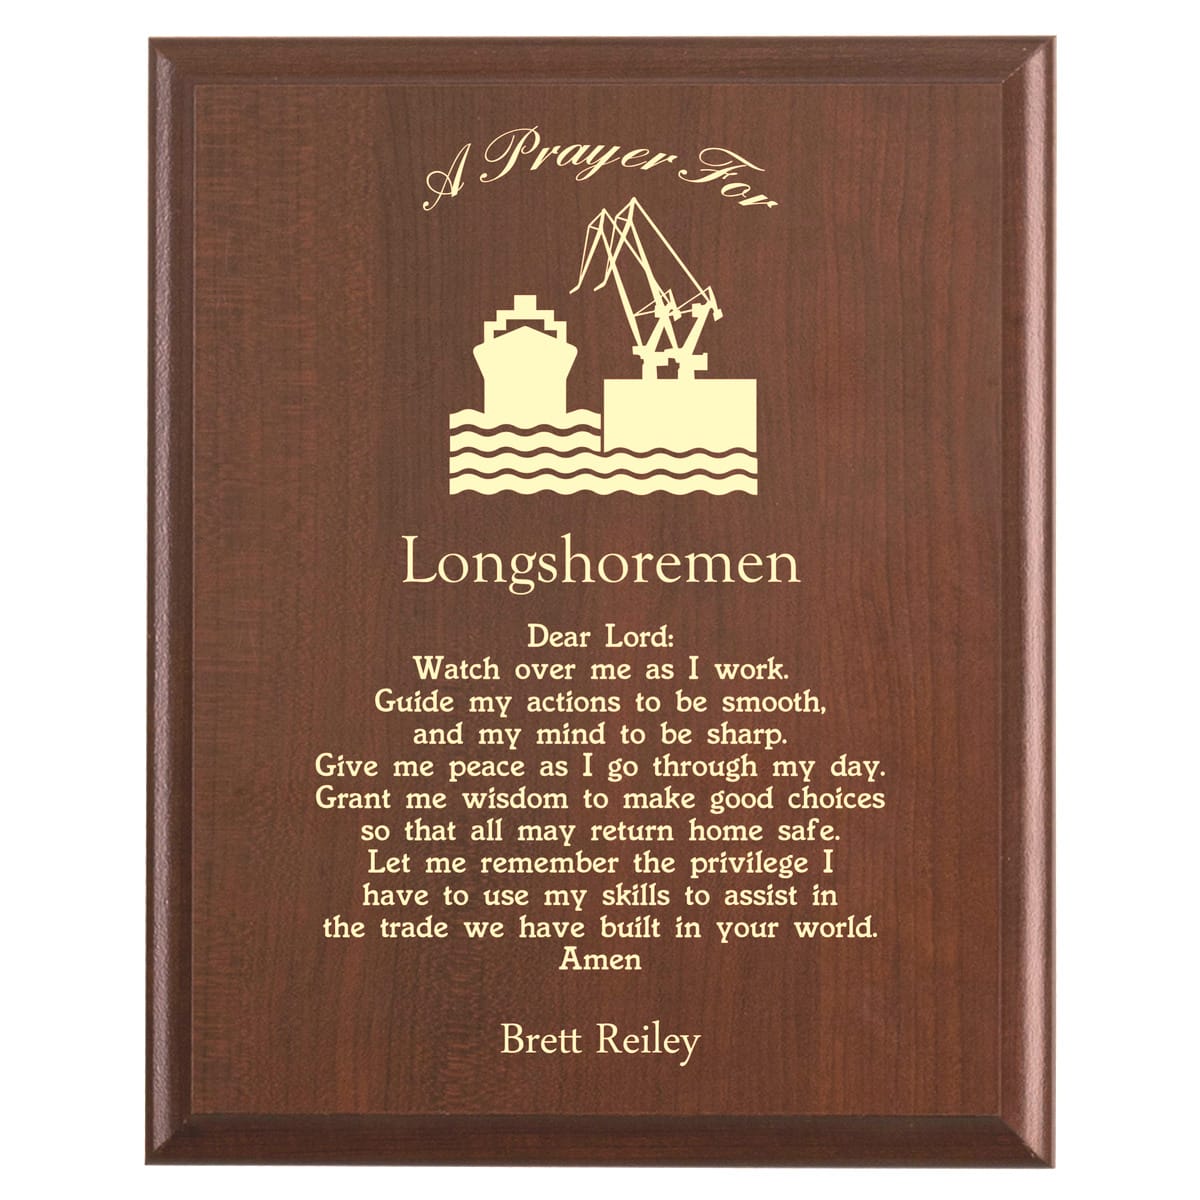 Plaque photo: Longshoreman Prayer Plaque design with free personalization. Wood style finish with customized text.